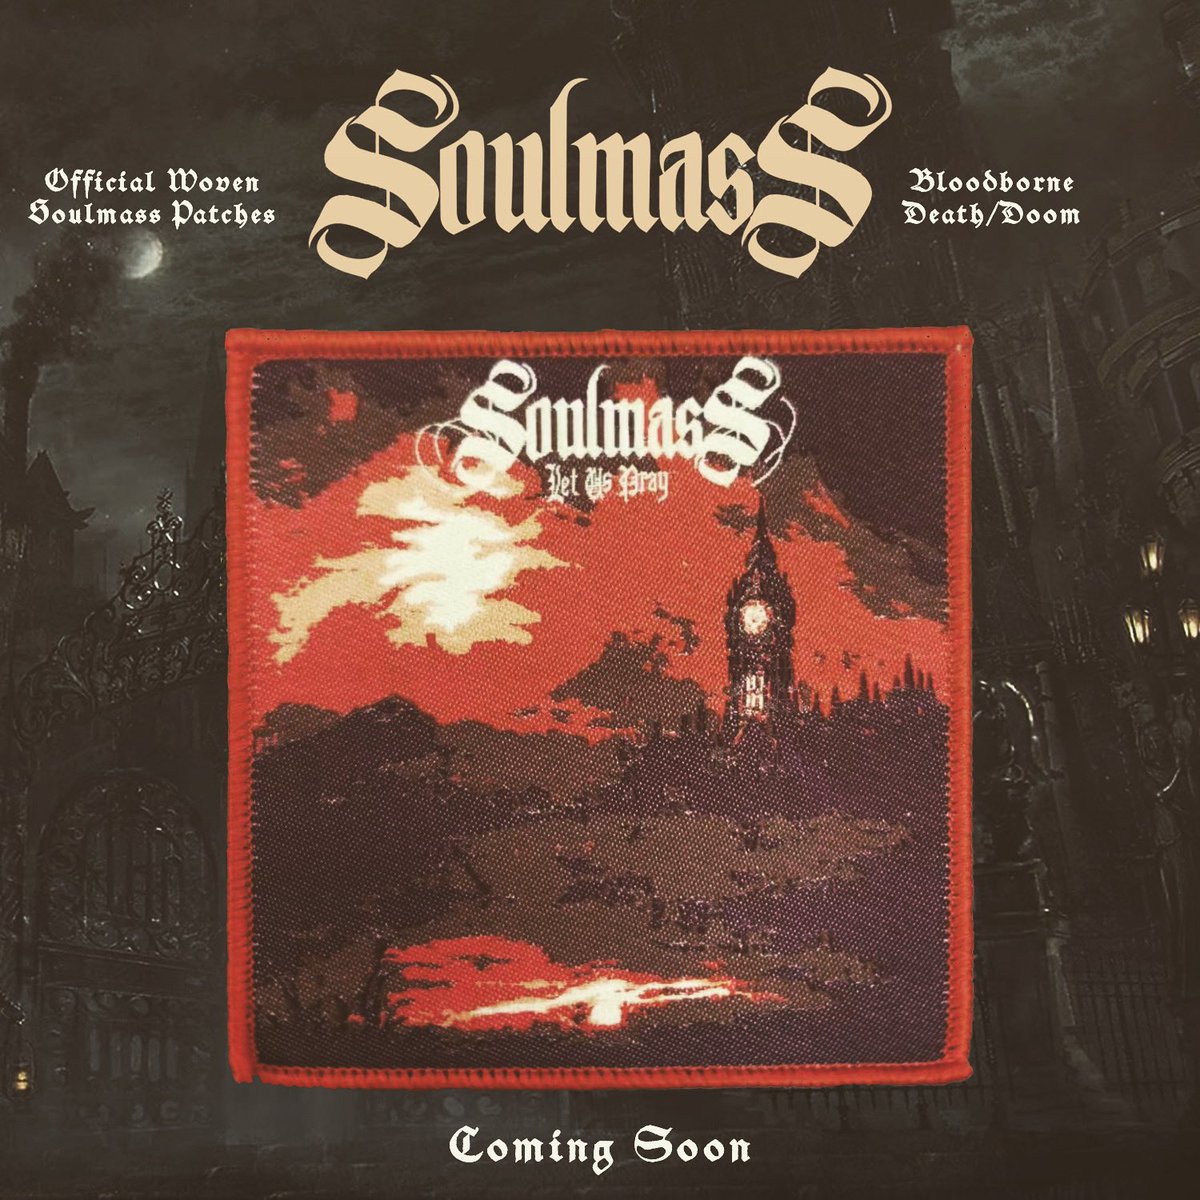 Official Soulmass patches are coming to Hearth. Travel back to Yharnam with one of the best albums of the year. Soulmass captures the crushing terror of Bloodborne with crushing riffs. 

#soulmass #bloodborne #wovenpatch #deathdoom #battlejacket #battlejackets #hearthpatches